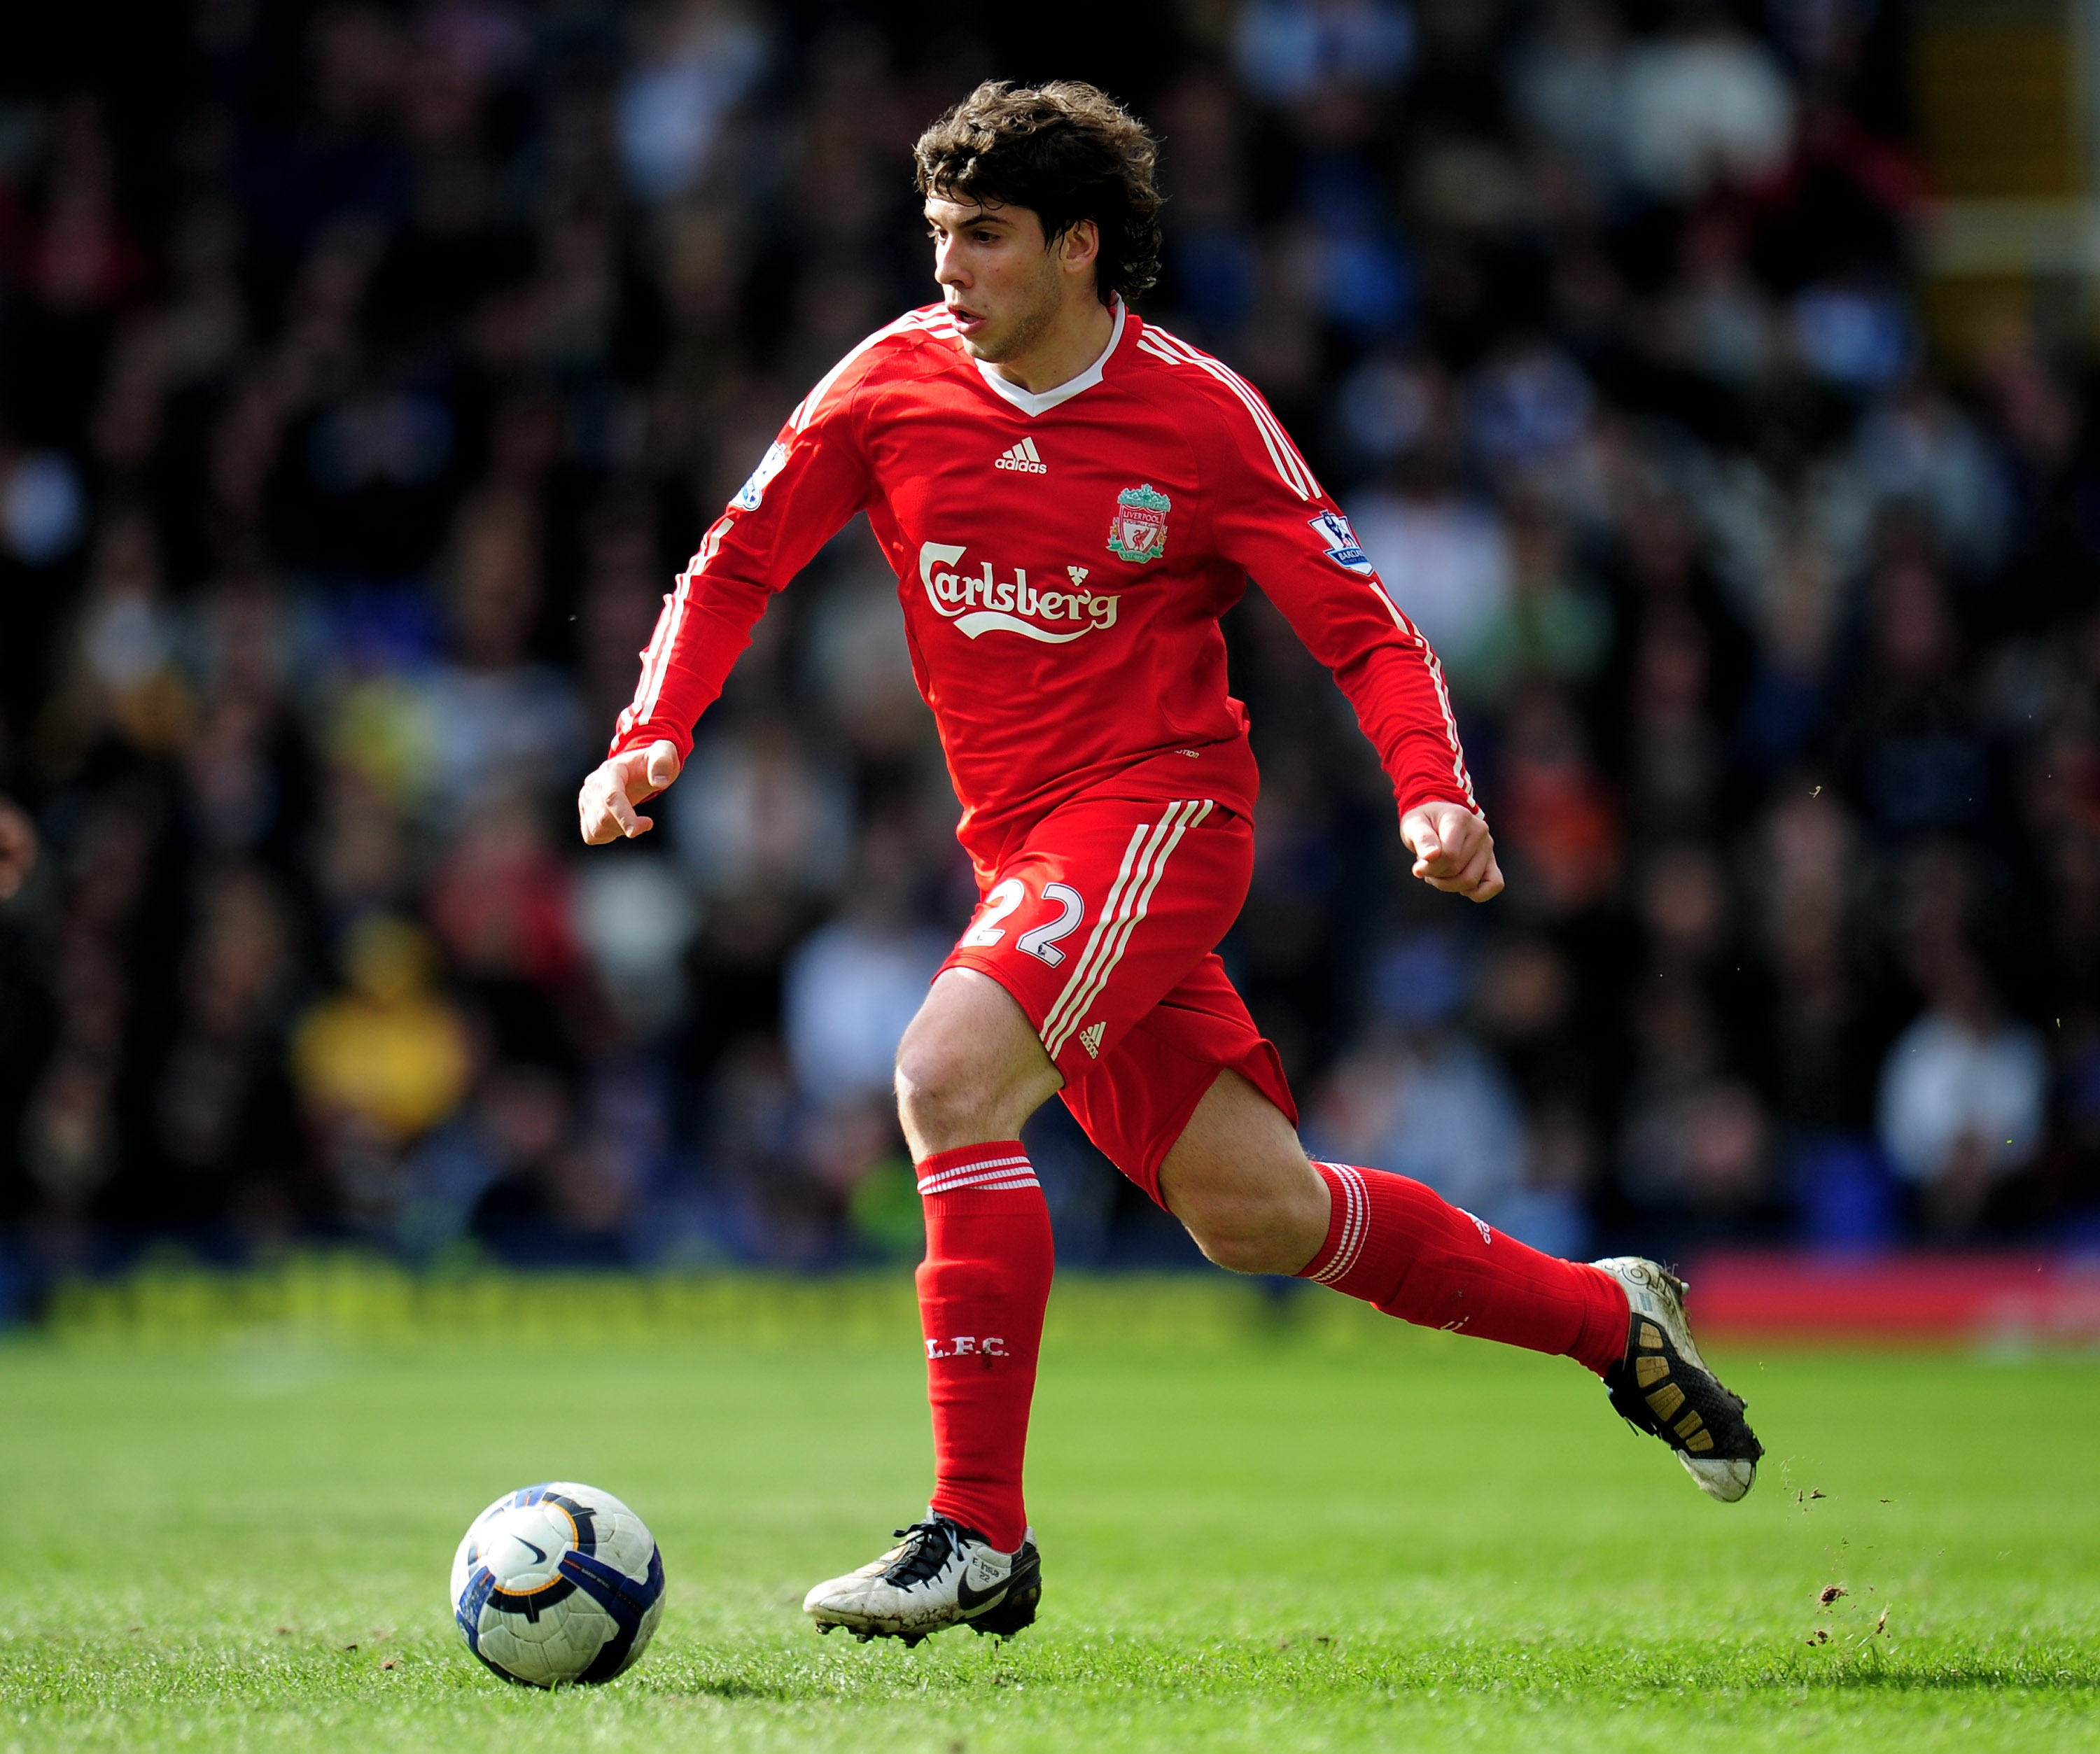 BIRMINGHAM, ENGLAND - APRIL 04:  Emiliano Insua of Liverpool in action during the Barclays Premier League match between Birmingham City and Liverpool at St. Andrews Stadium on April 4, 2010 in Birmingham, England.  (Photo by Shaun Botterill/Getty Images)